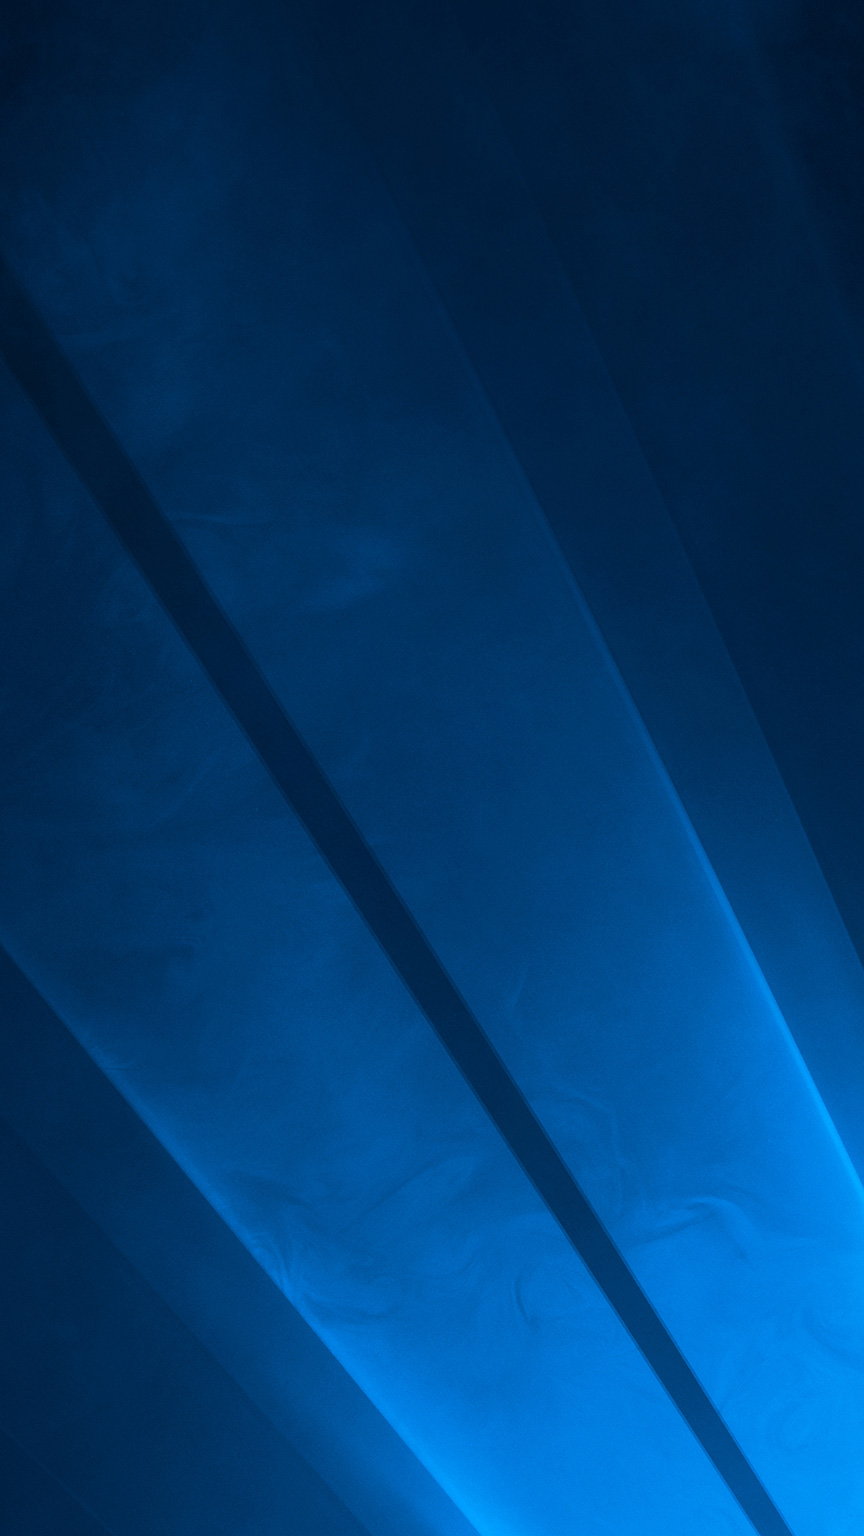 Windows 10 Default Wallpaper for lumia Devices by Yashlaptop on DeviantArt